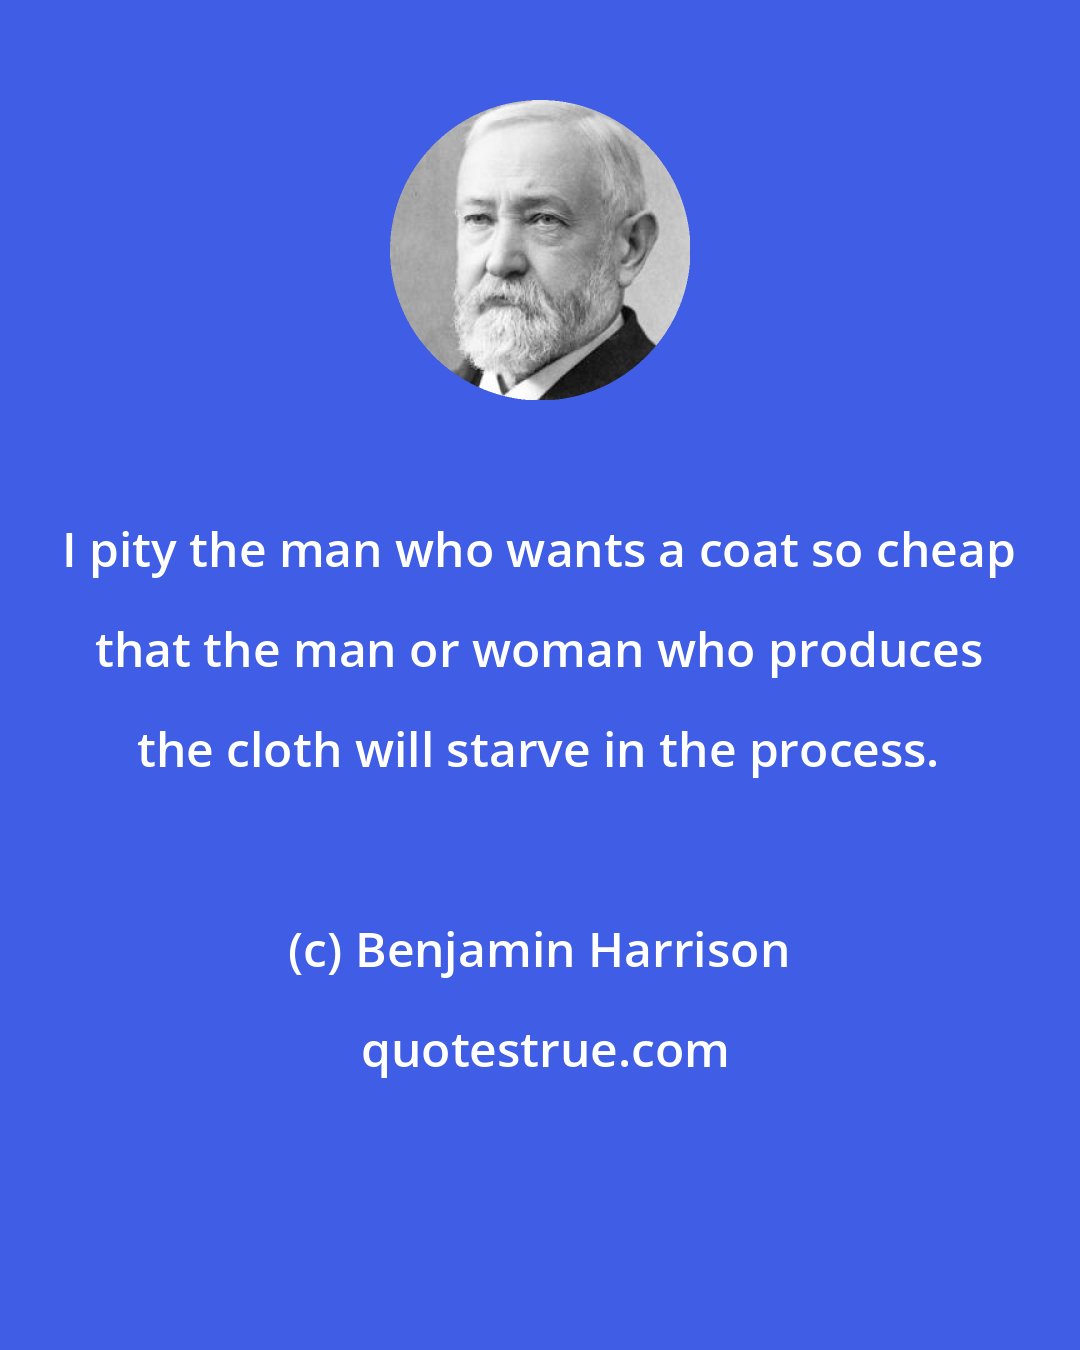 Benjamin Harrison: I pity the man who wants a coat so cheap that the man or woman who produces the cloth will starve in the process.